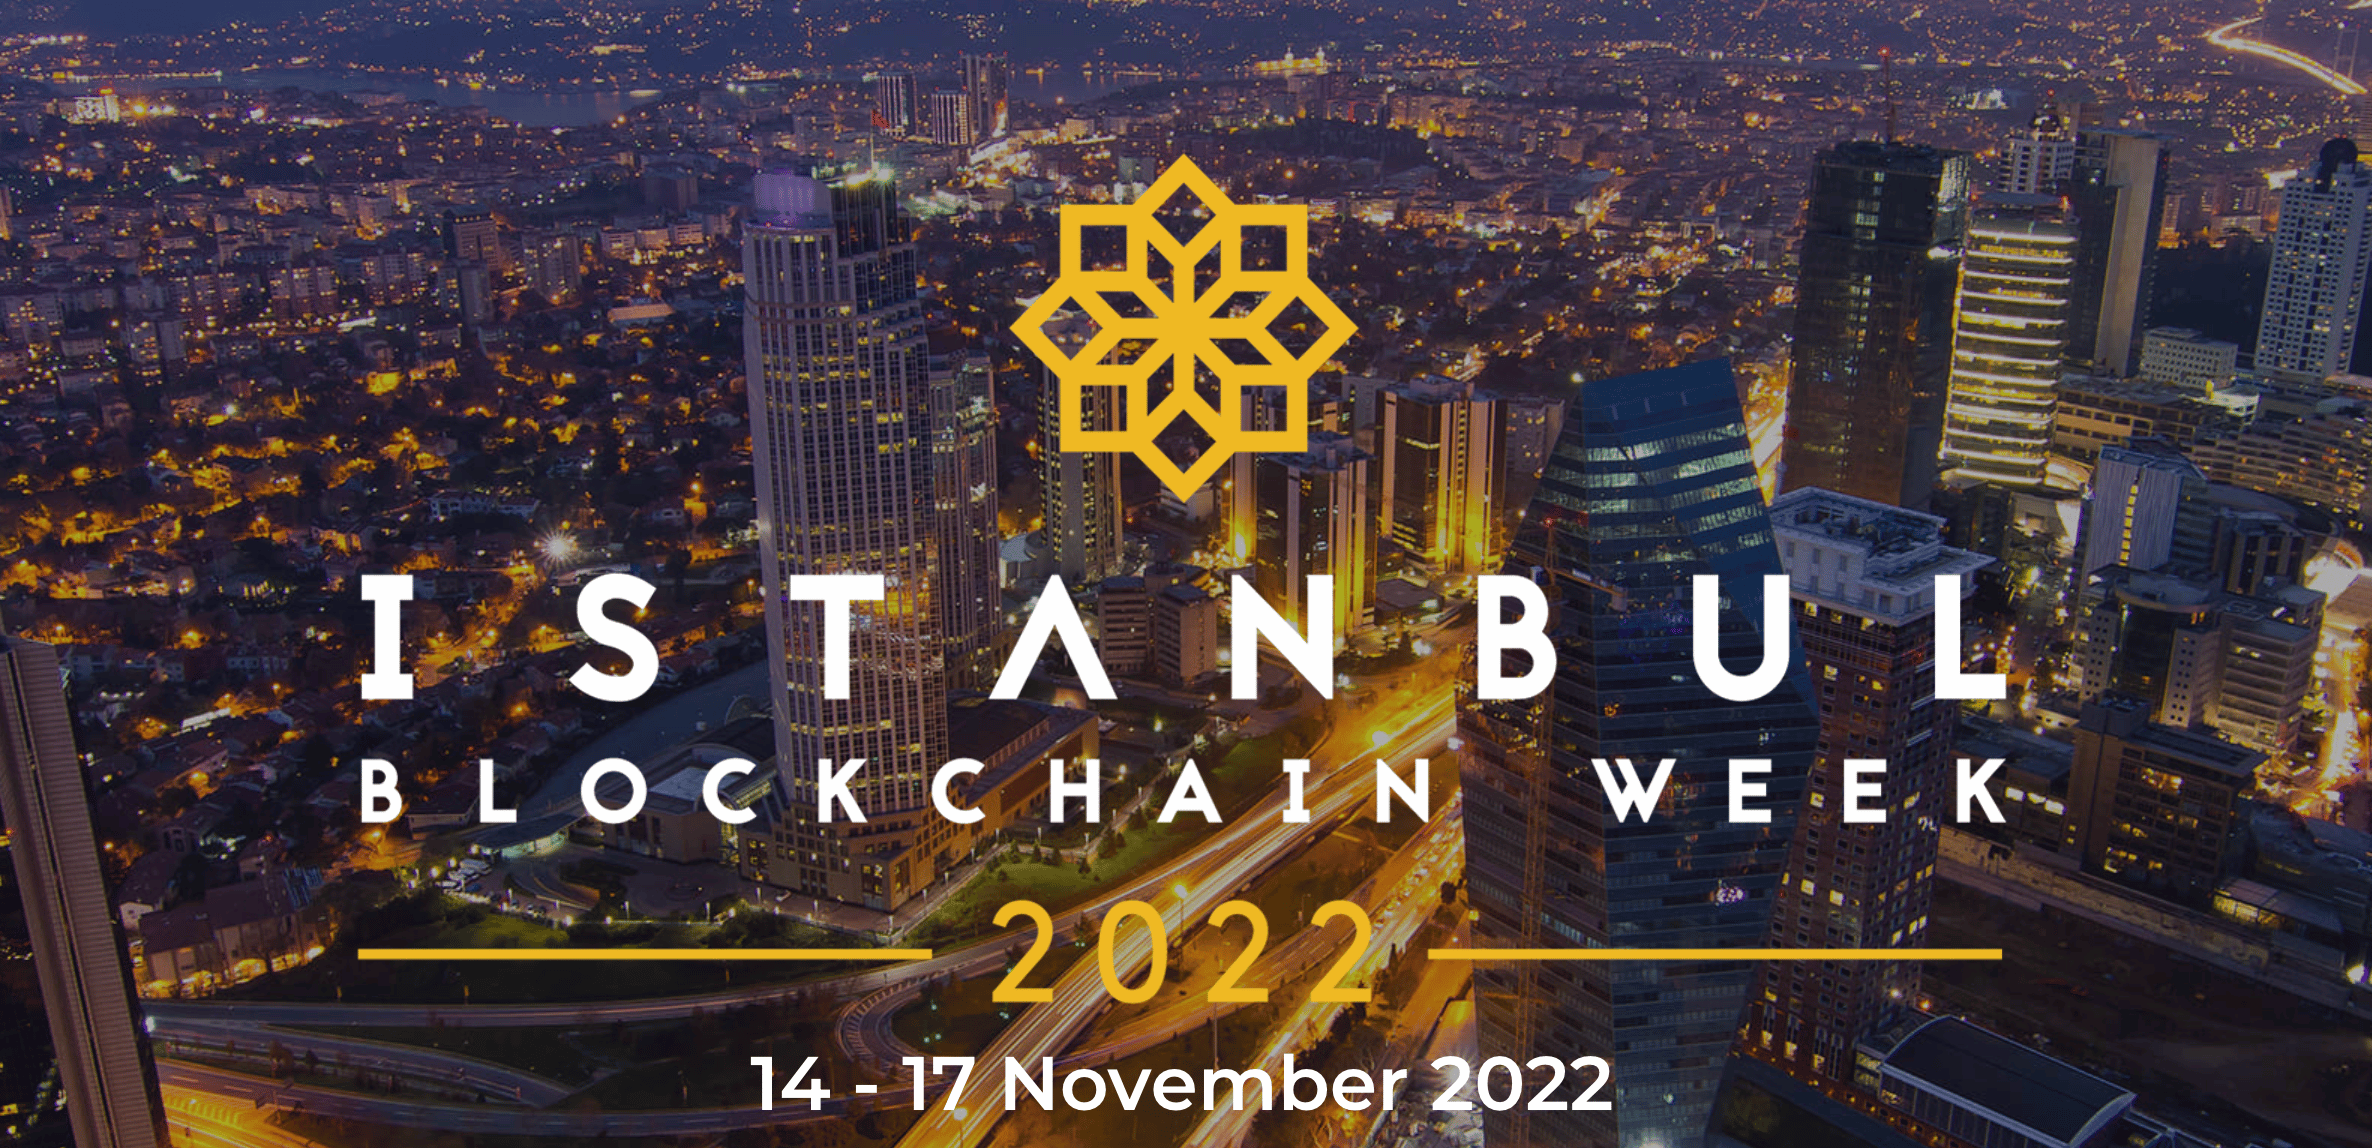 Image of Istanbul Blockchain Week logo and text